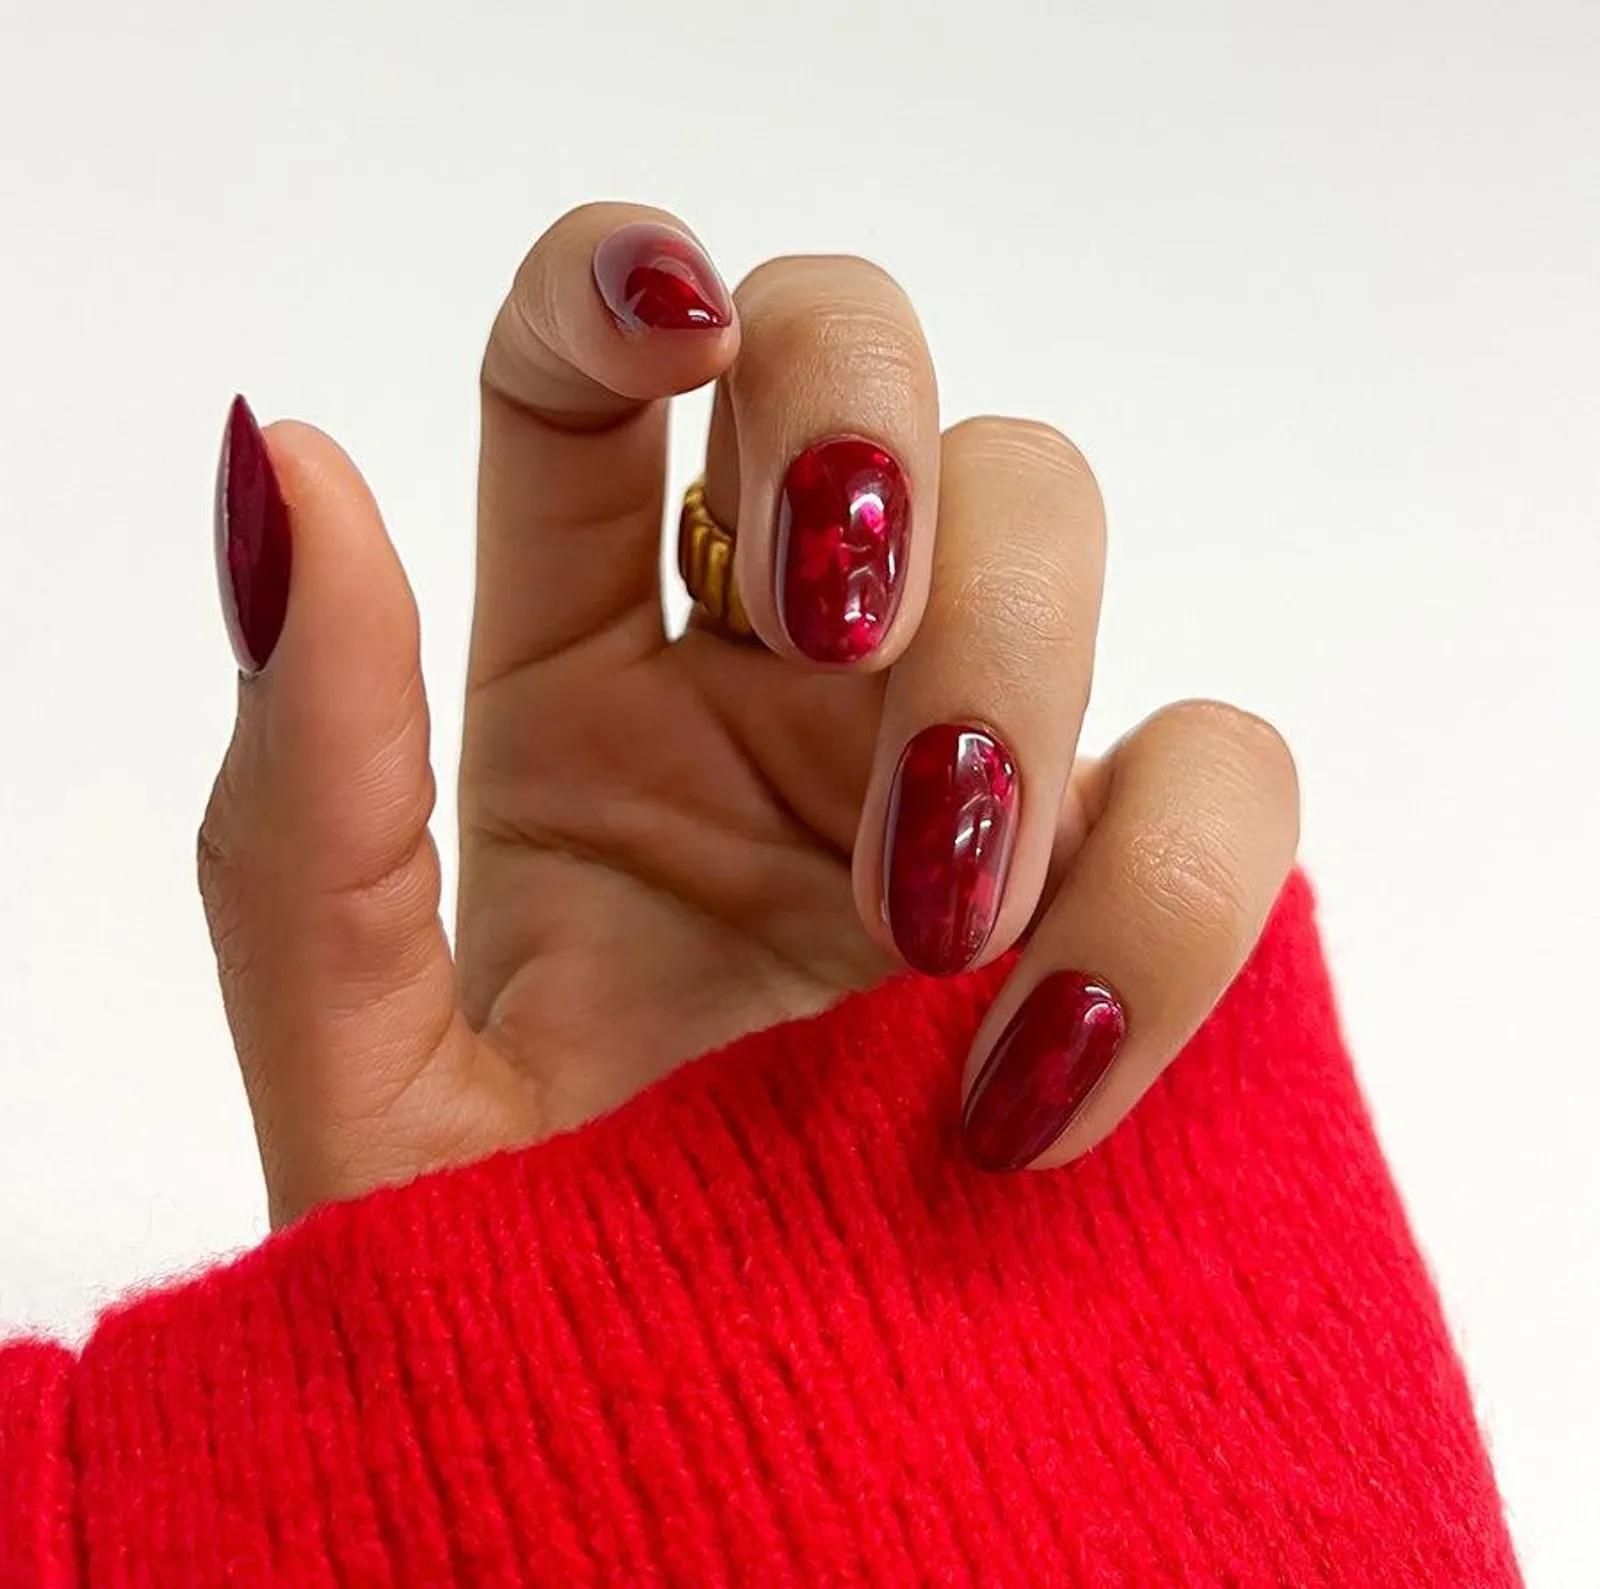 13 Best Red Nail Polish Colors - Best Red Shades for Nails 2022